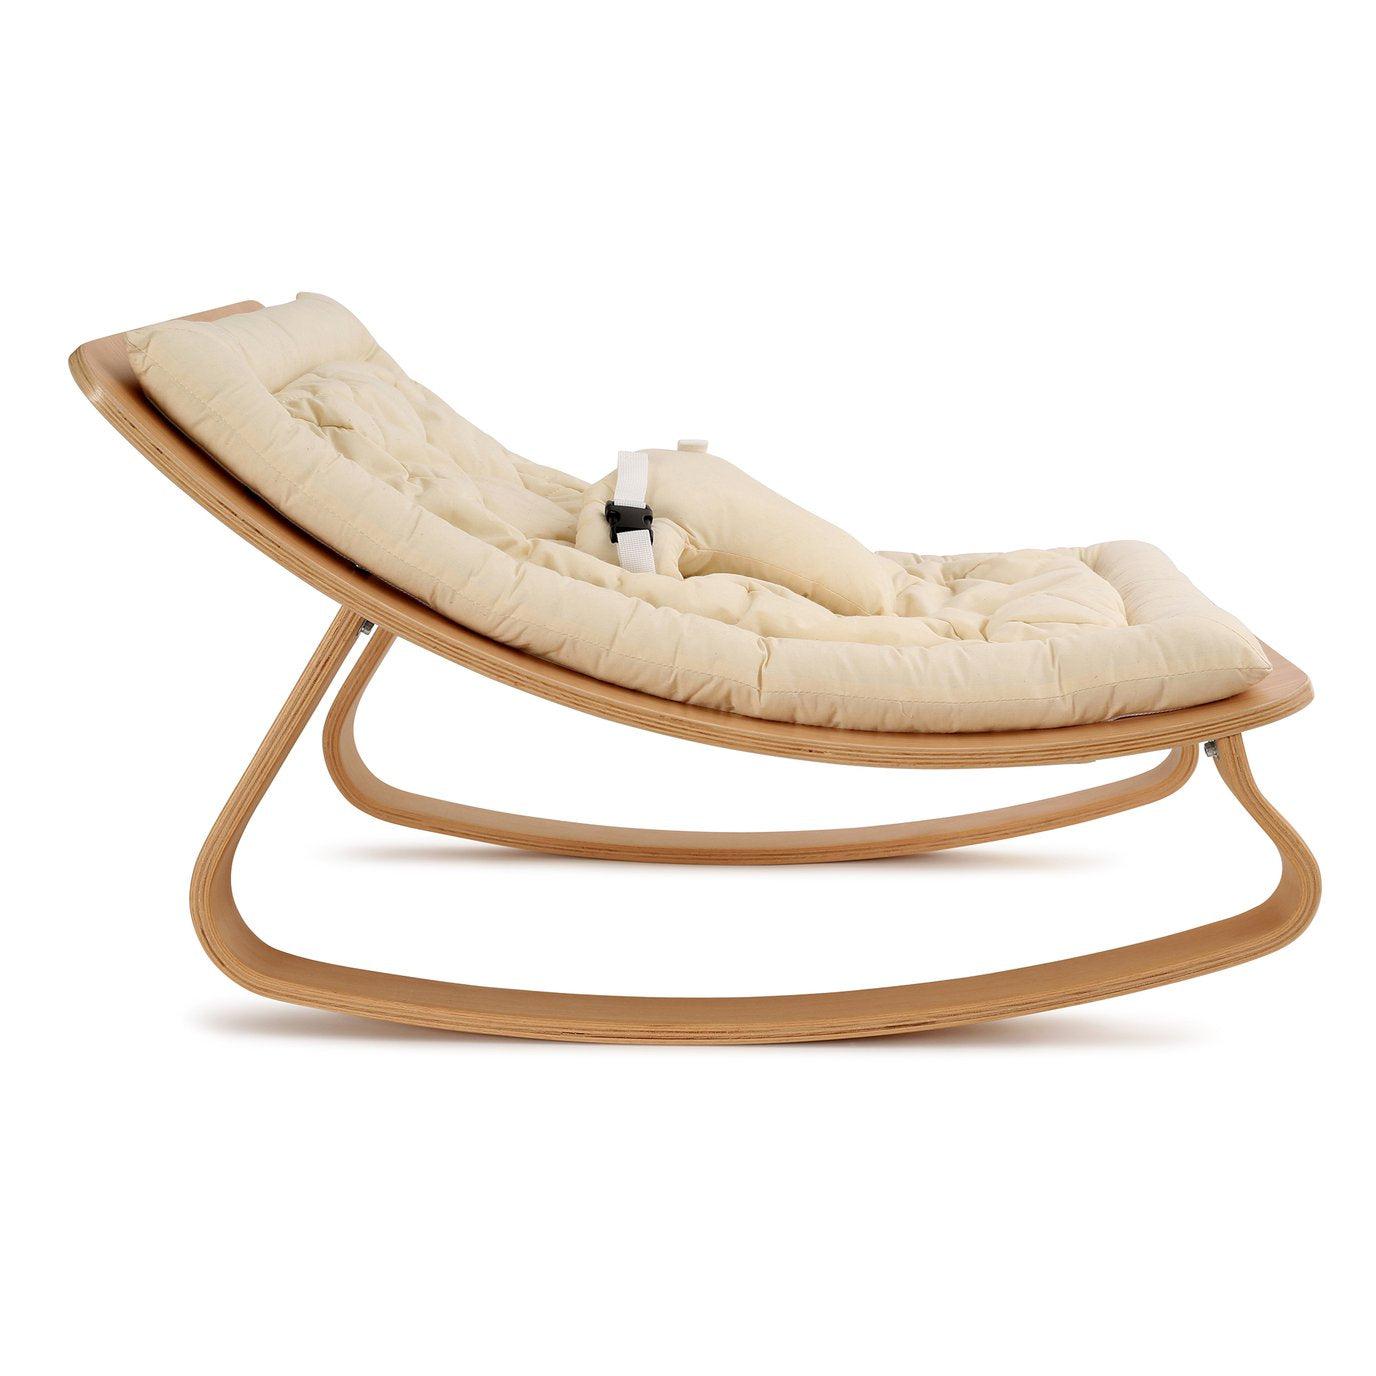 A Levo Rocker by Charlie Crane with a wooden baby rocker and an Organic White cover.